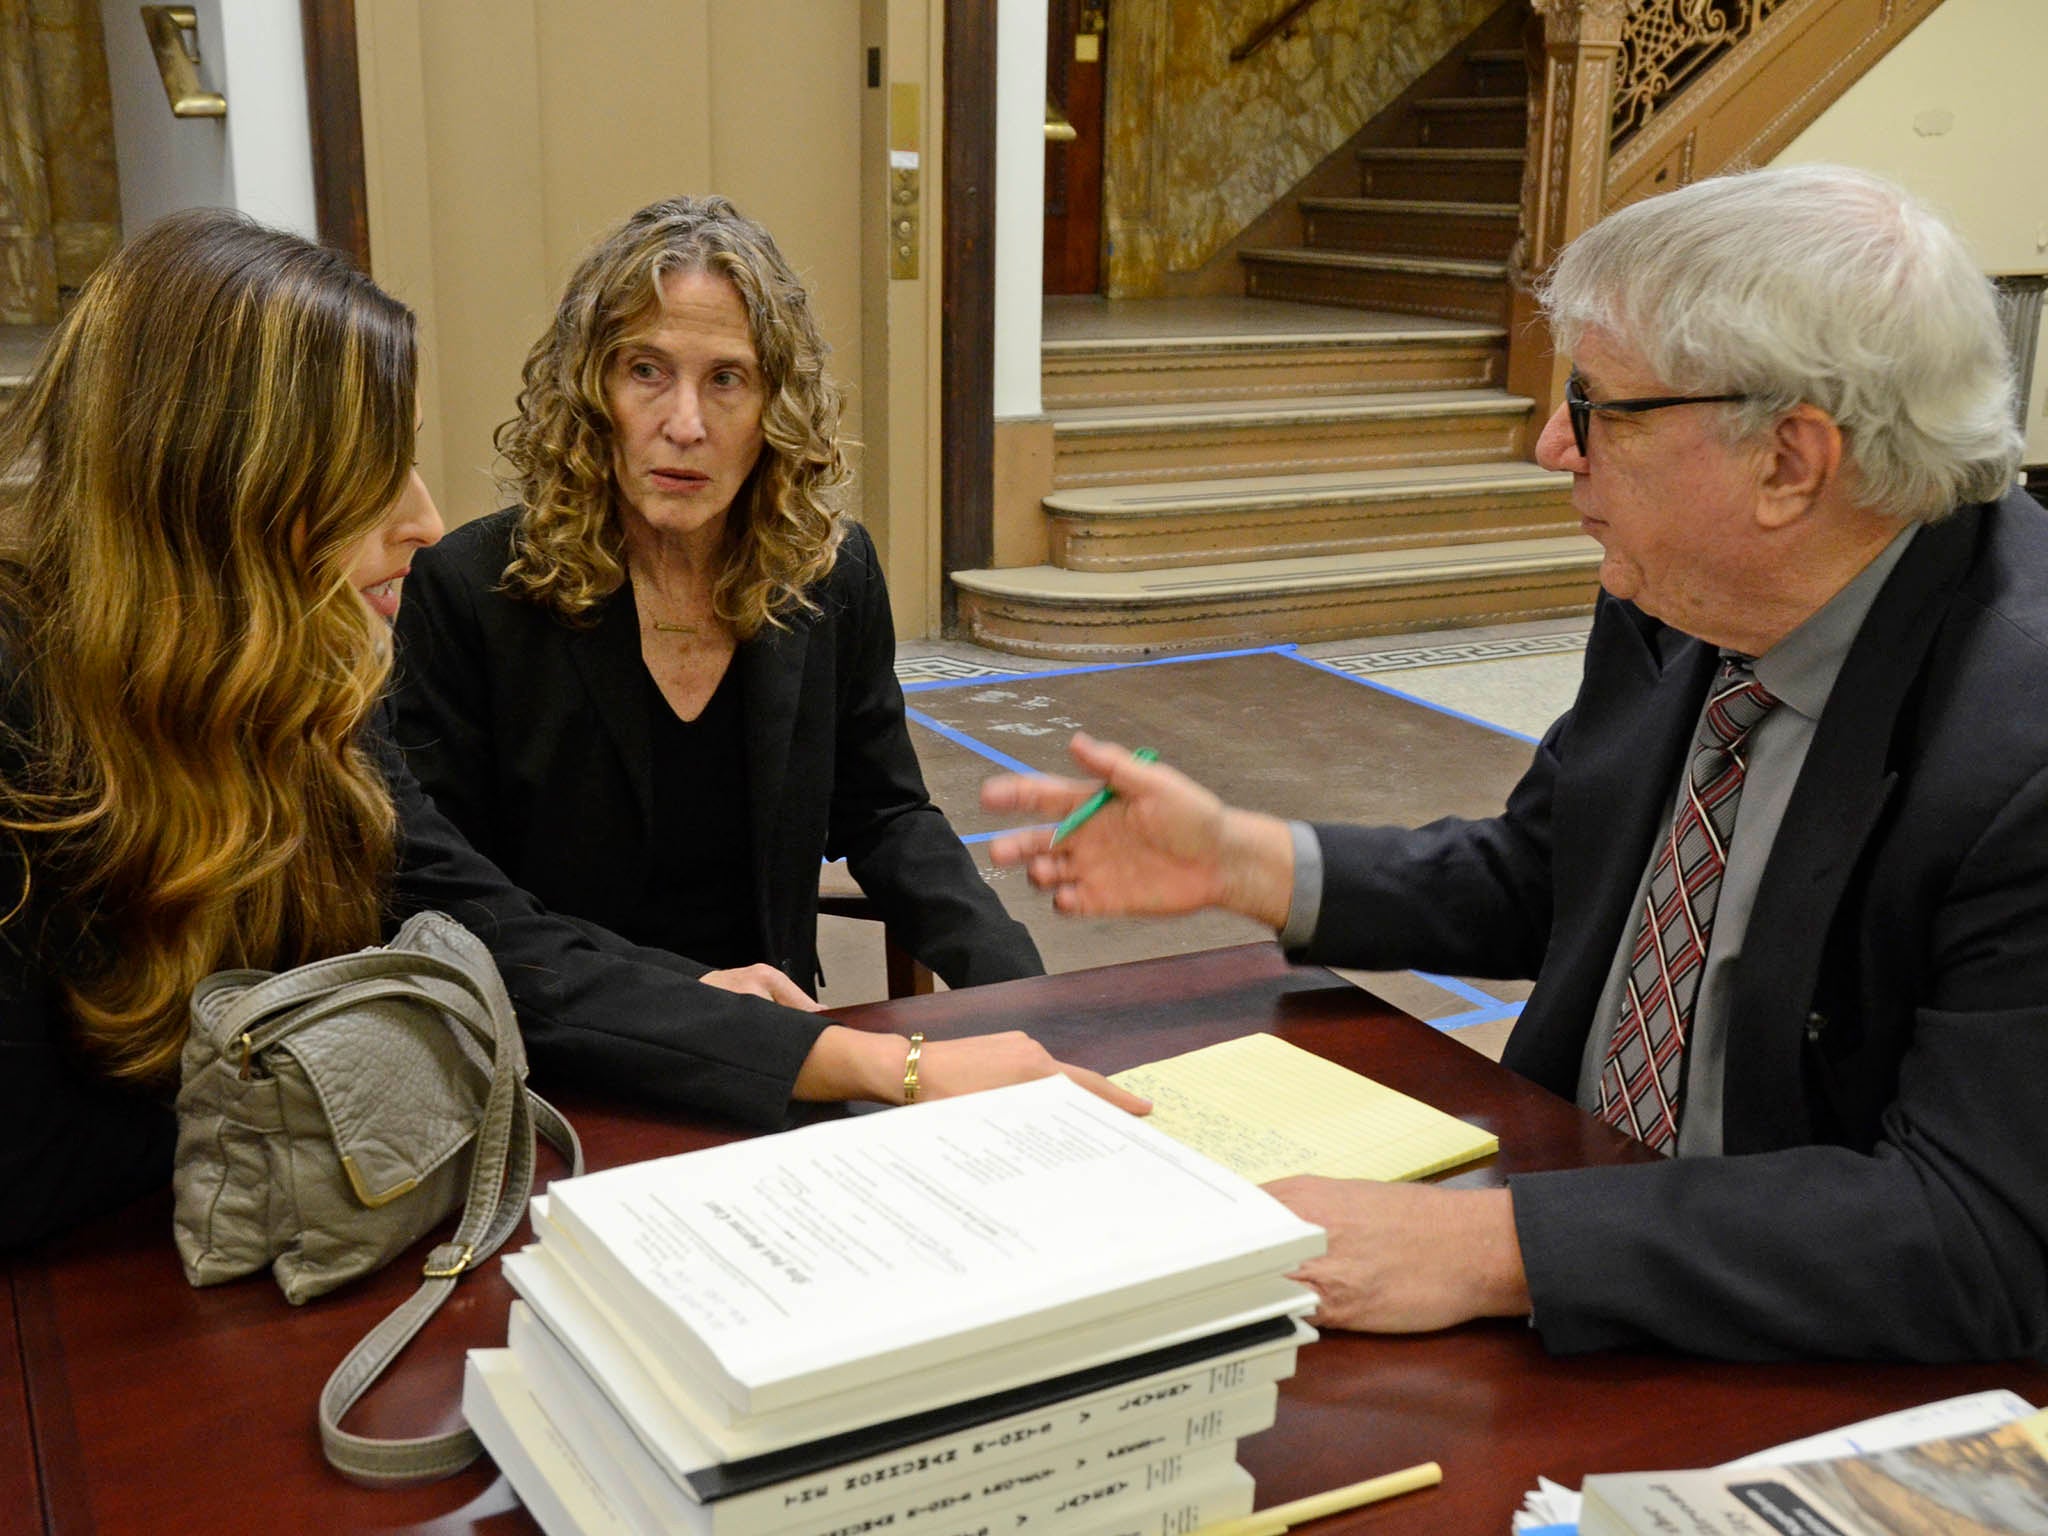 NhRP attorneys Monica Miller and Elizabeth Stein with NhRP president Steven Wise before Tommy and Kiko’s March 2017 appellate hearing in NYC